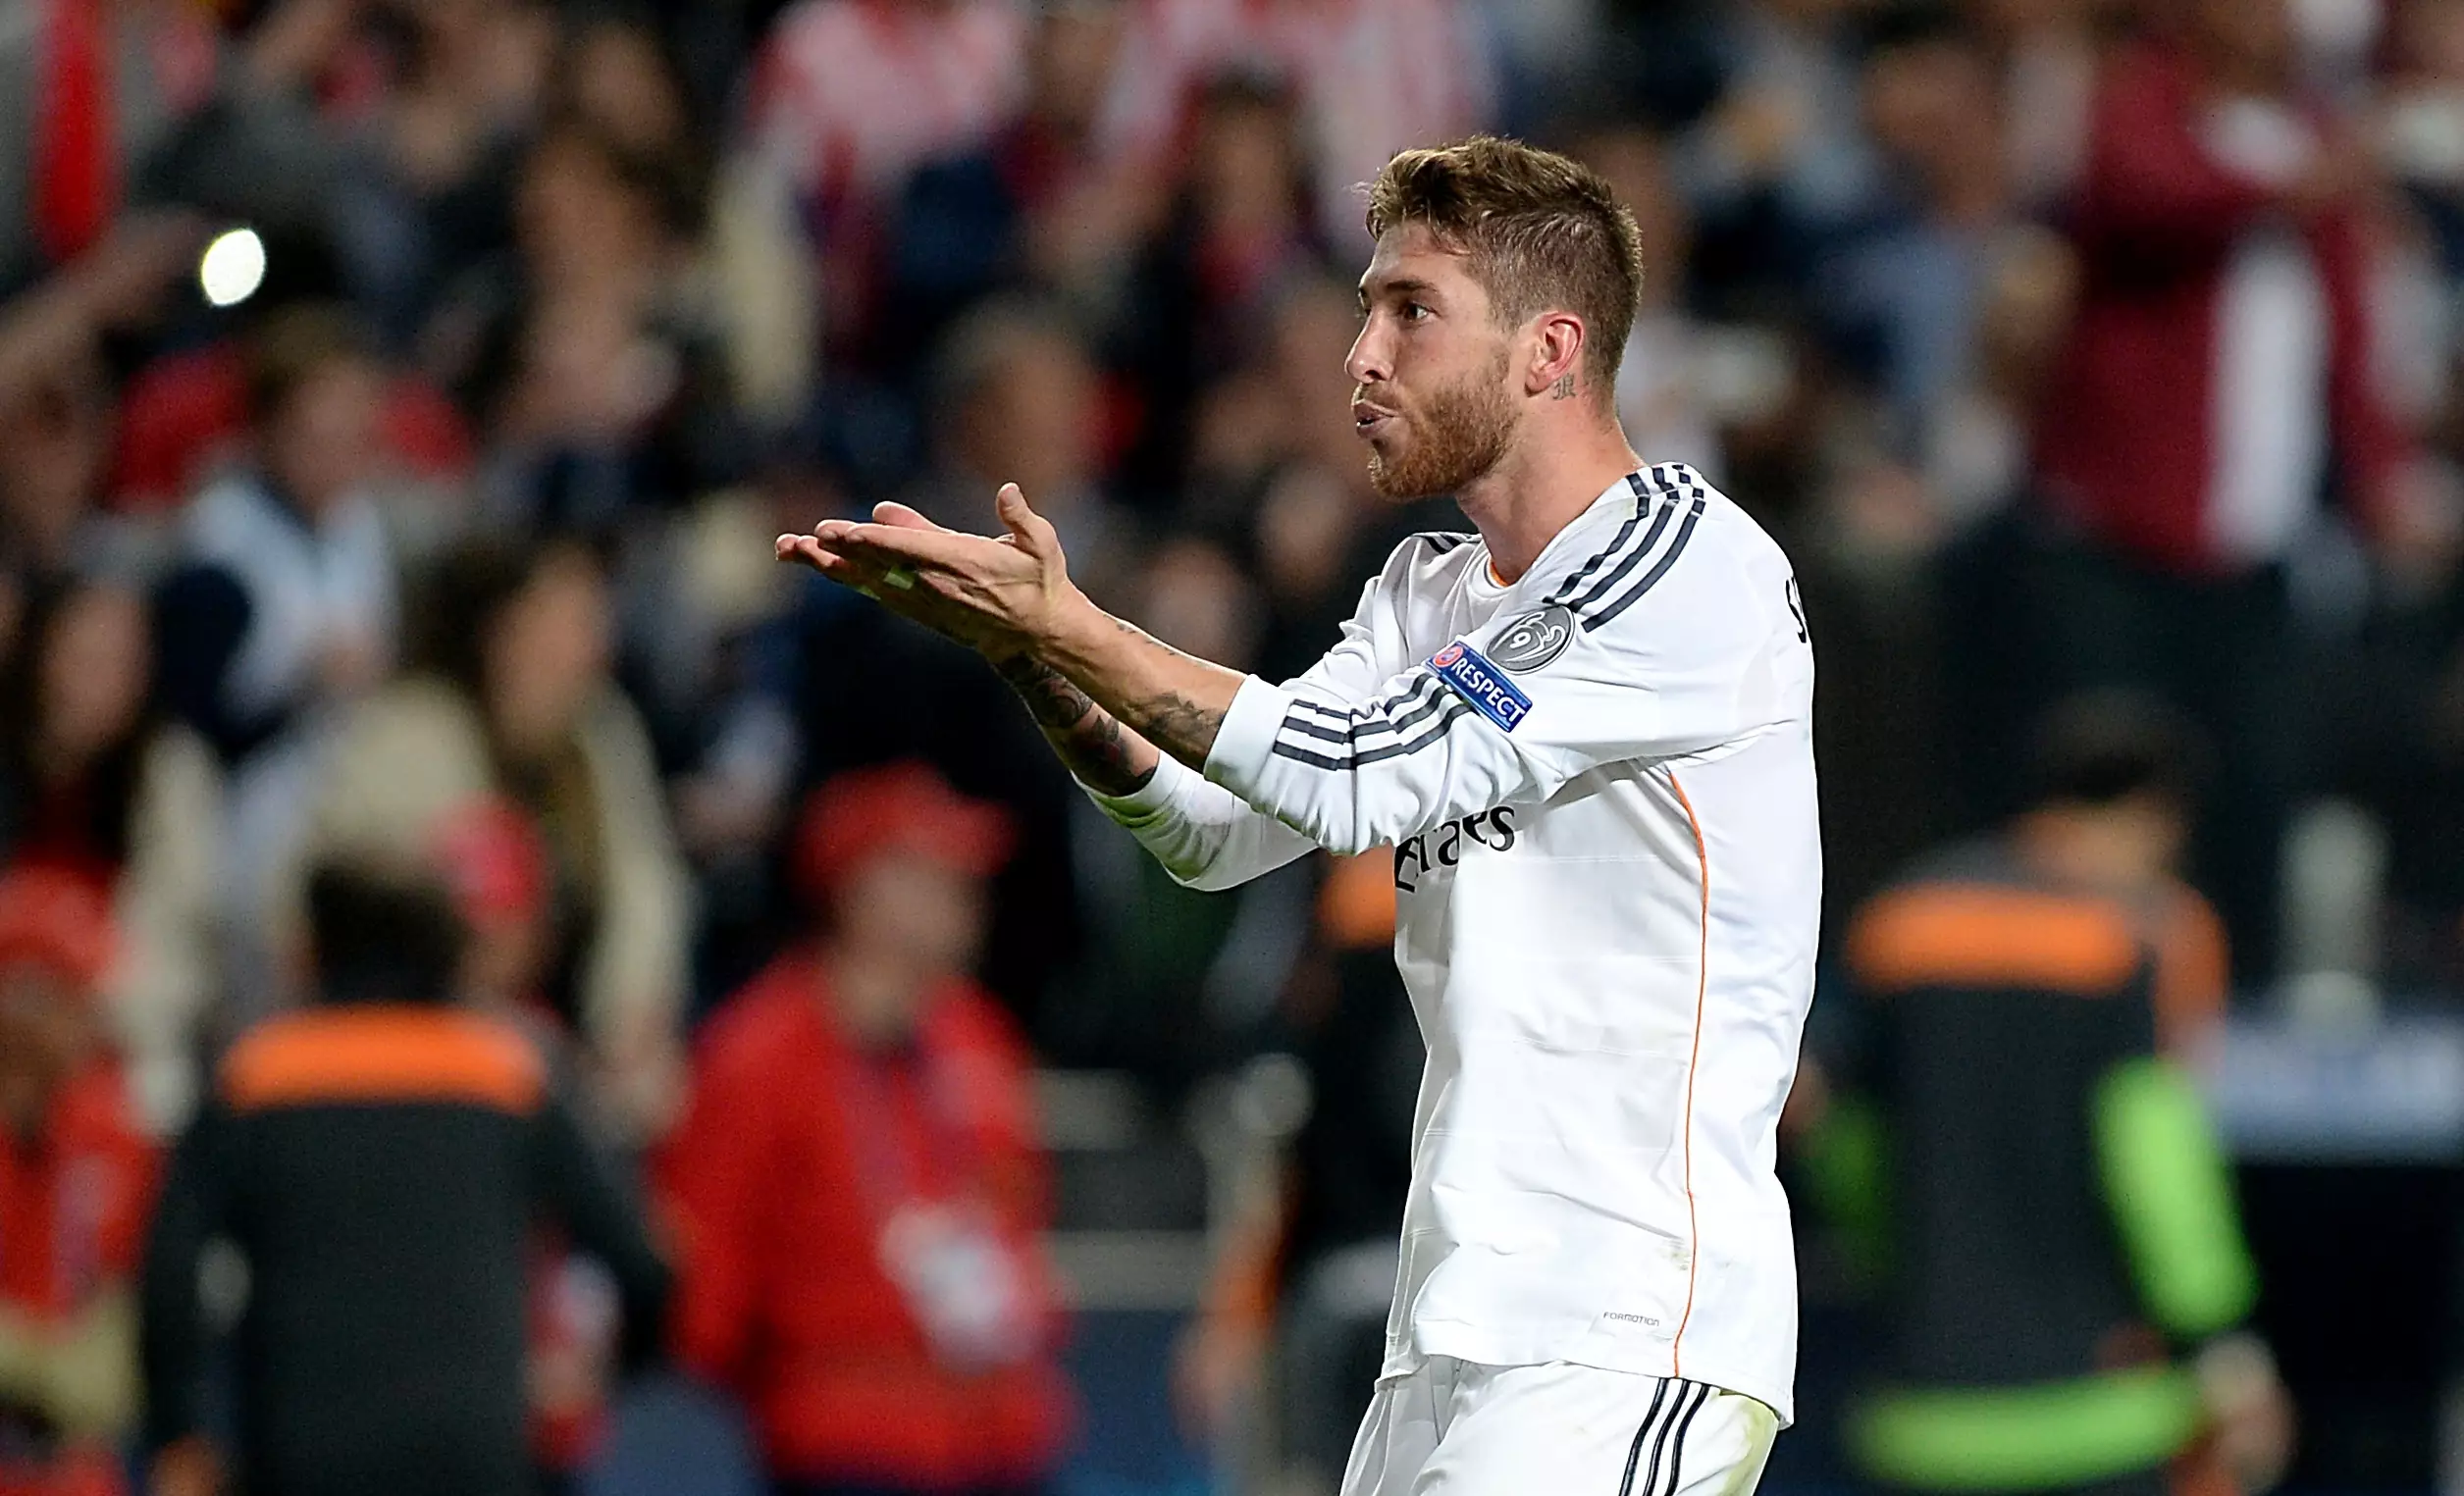 Ramos celebrates scoring in the 2014 Champions League final. Image: PA Images